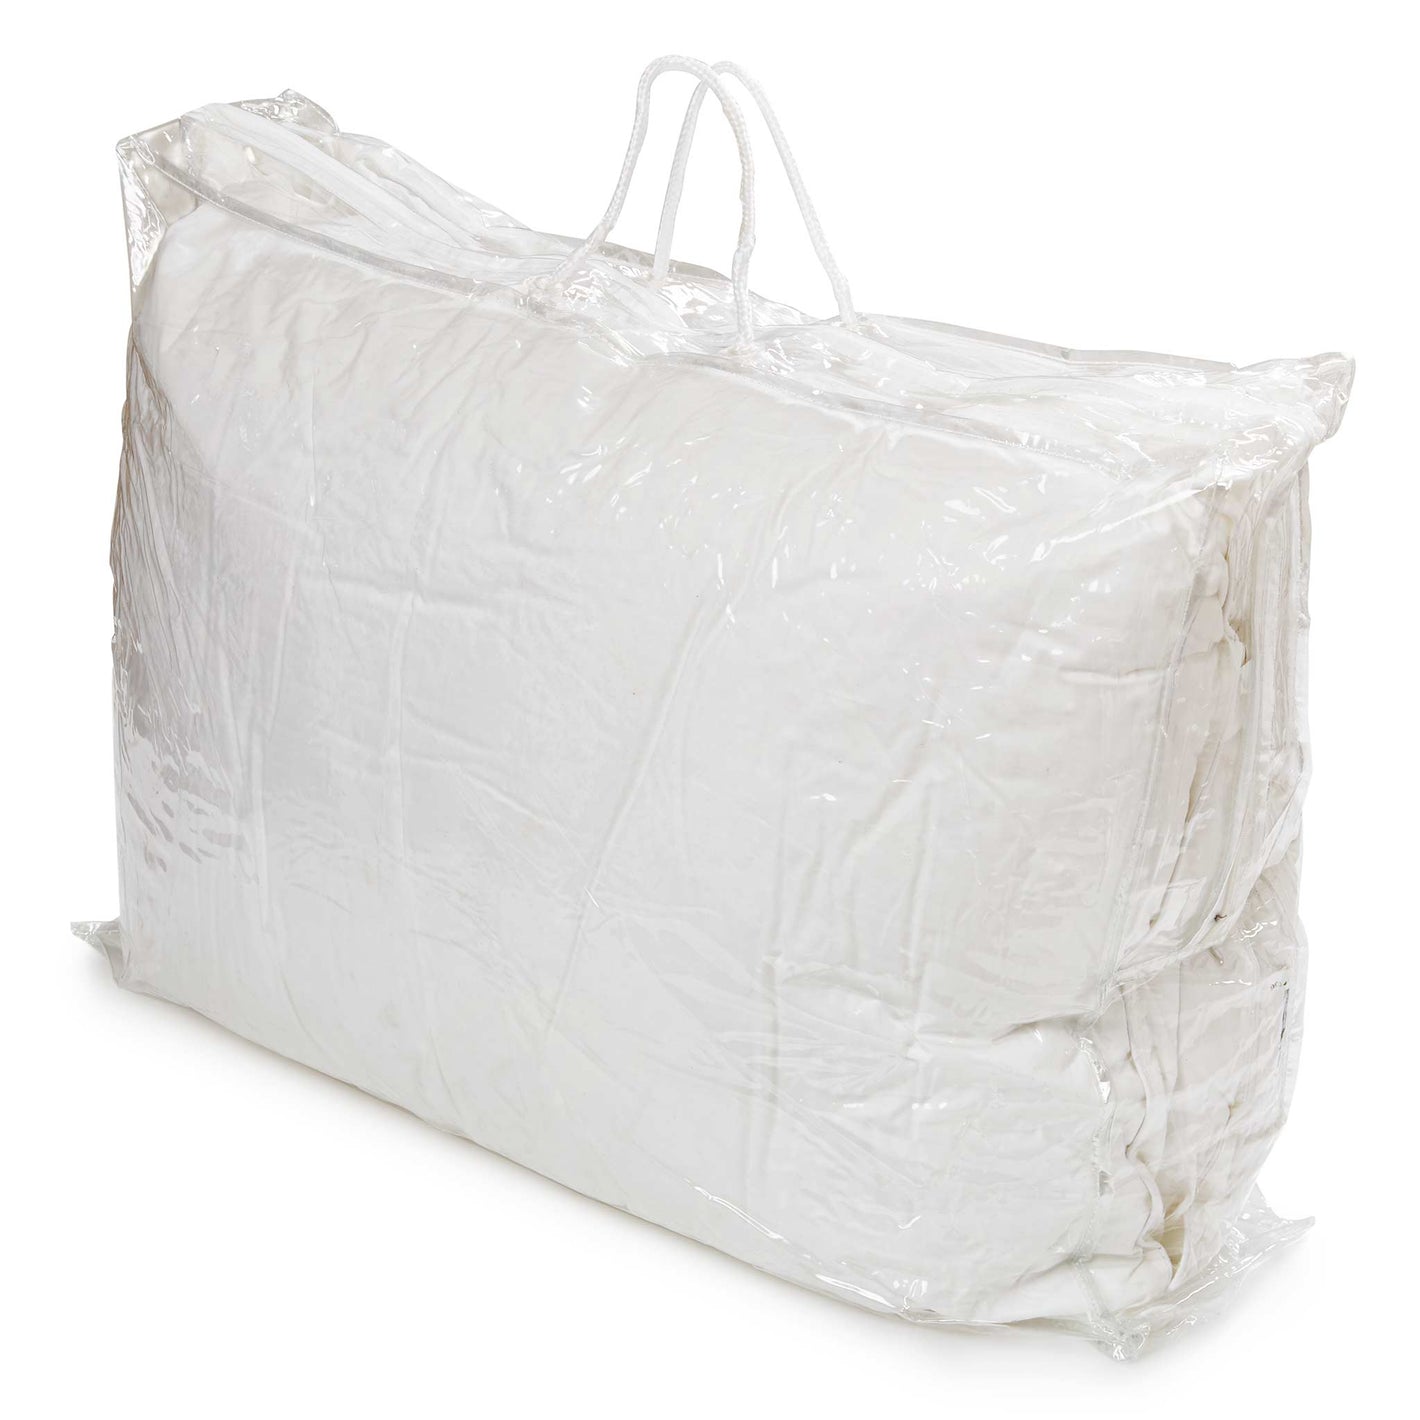 Large transparent pillow and duvet storage bag with handle